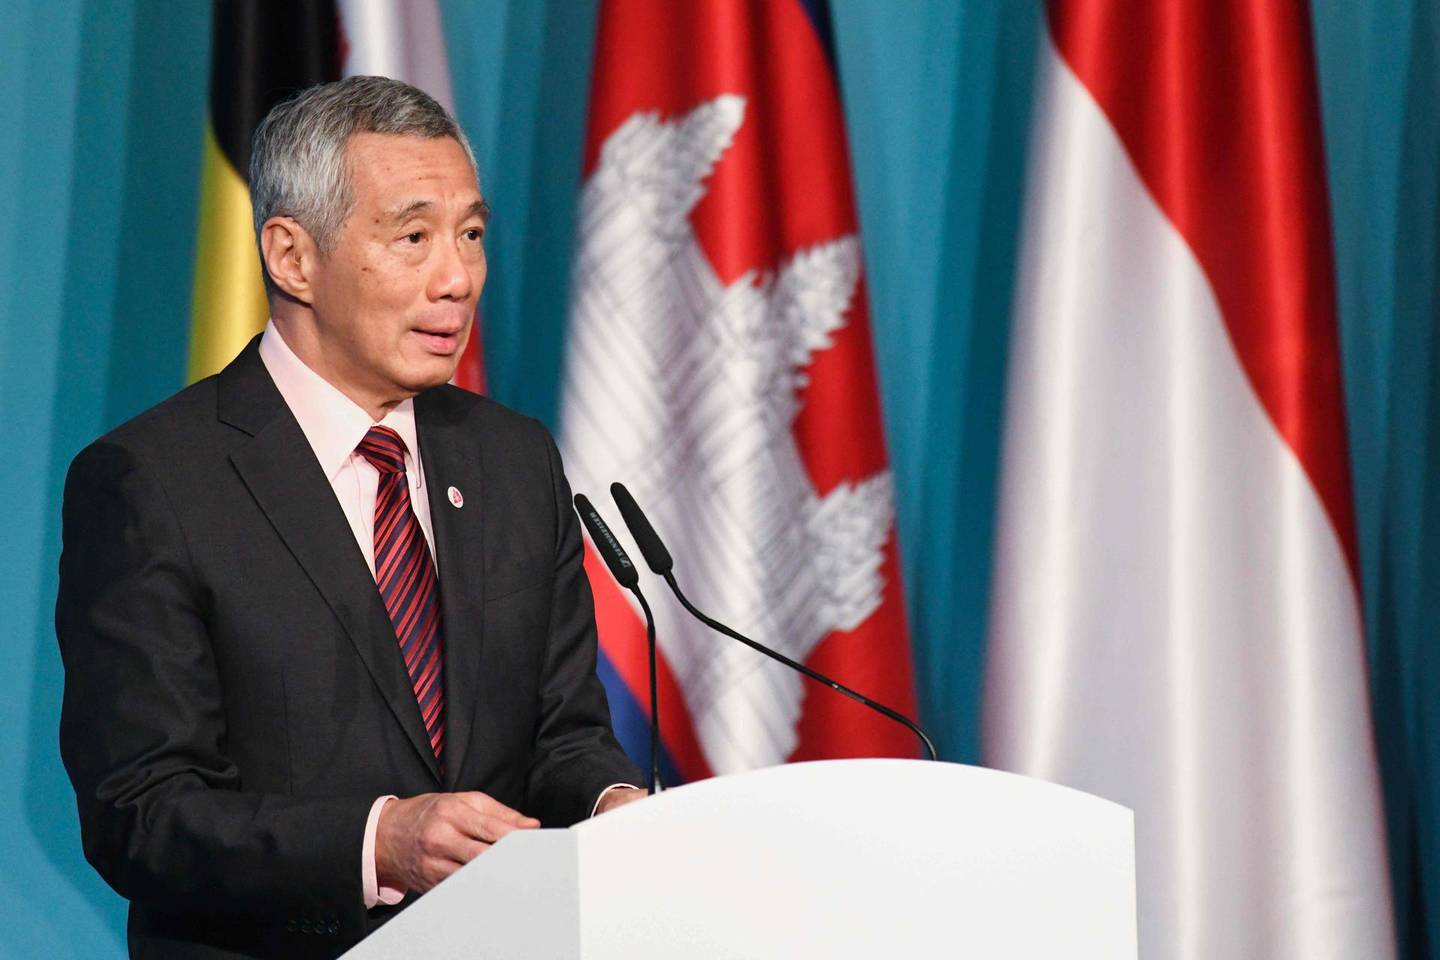 Singapore Prime Minister Lee Hsien Loong speaks during a press conference at the 32nd ASEAN (Association of Southeast Asian Nations) Summit in Singapore on April 28, 2018. / AFP PHOTO / ROSLAN RAHMAN